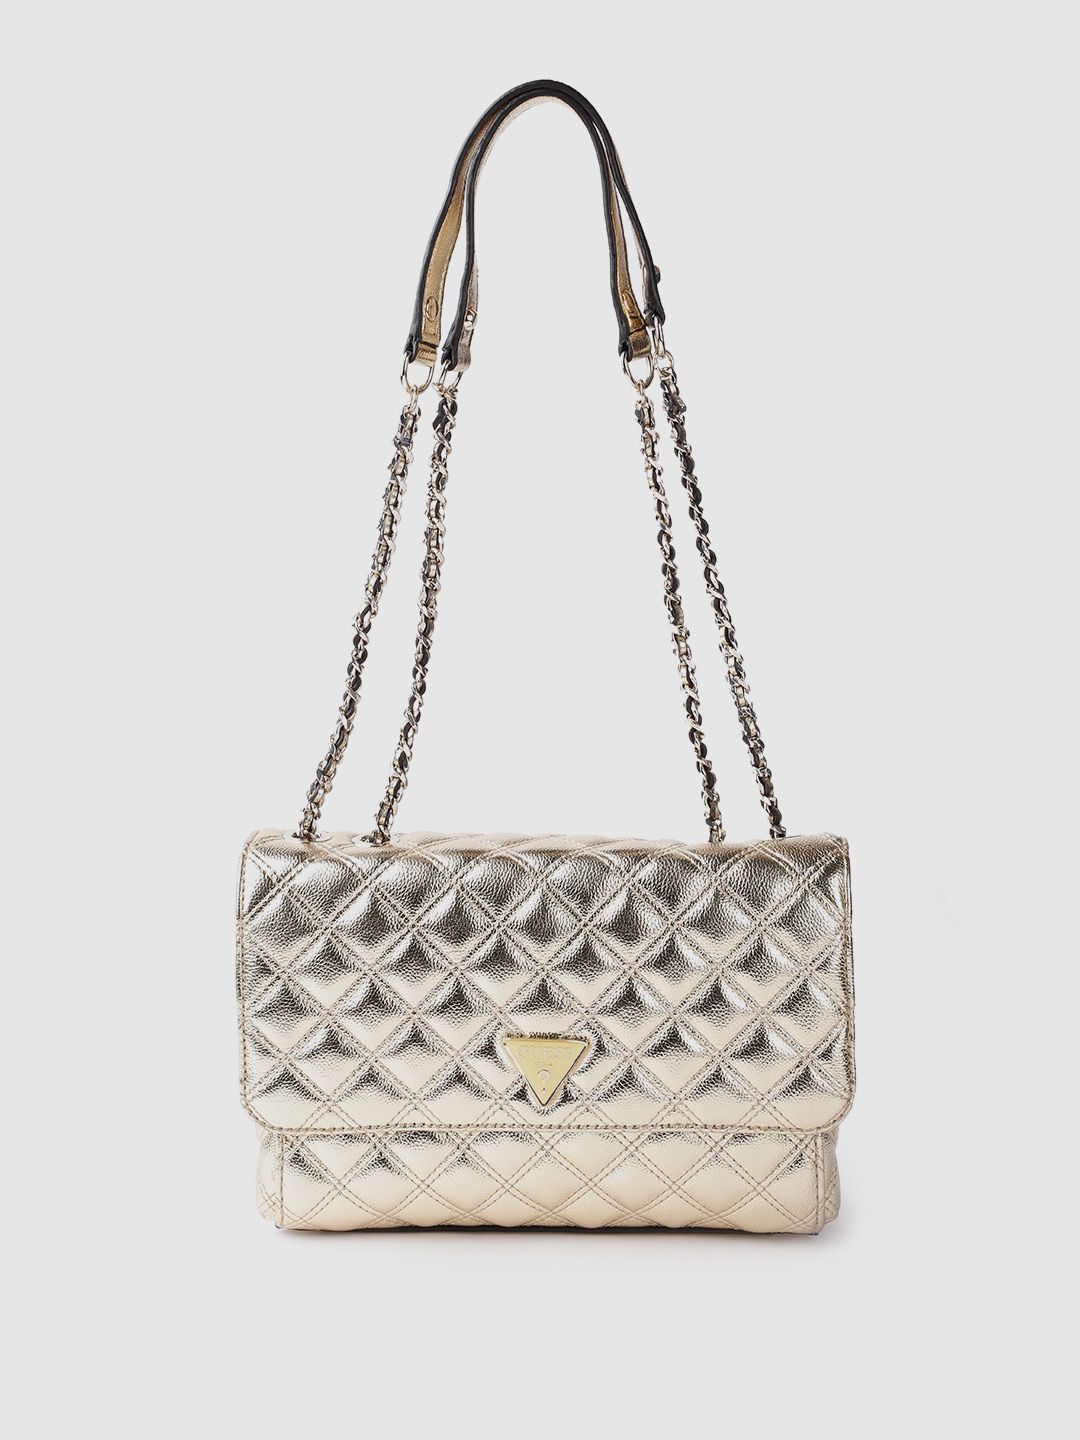 GUESS Women Gold-Toned Quilted Structured Shoulder Bag Price in India